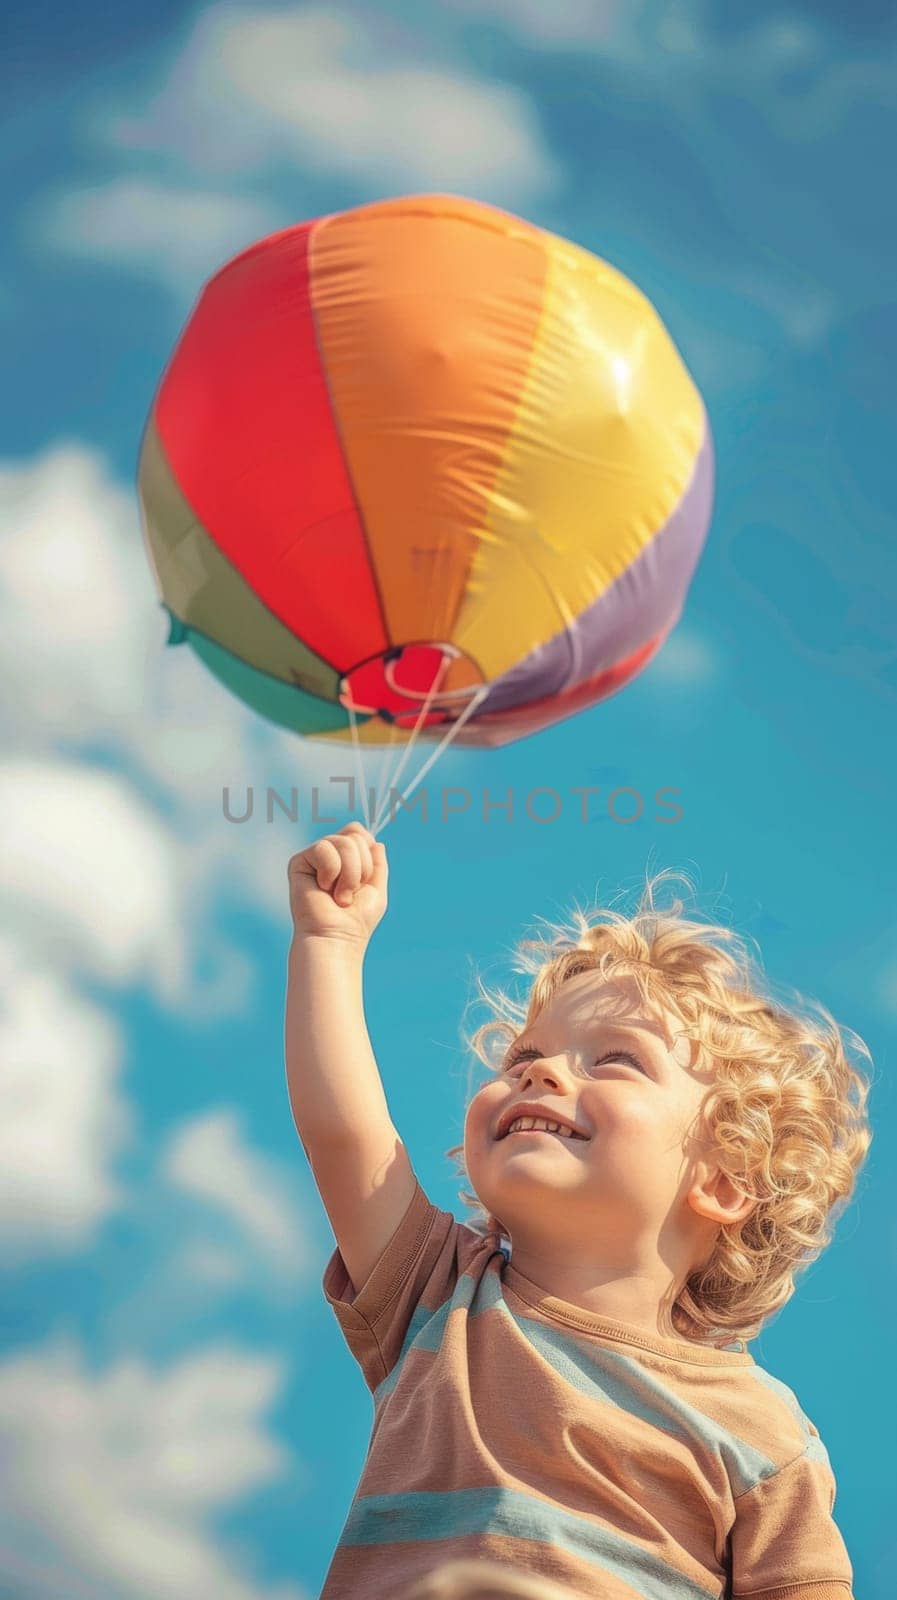 A young boy holding a colorful kite in the air, AI by starush